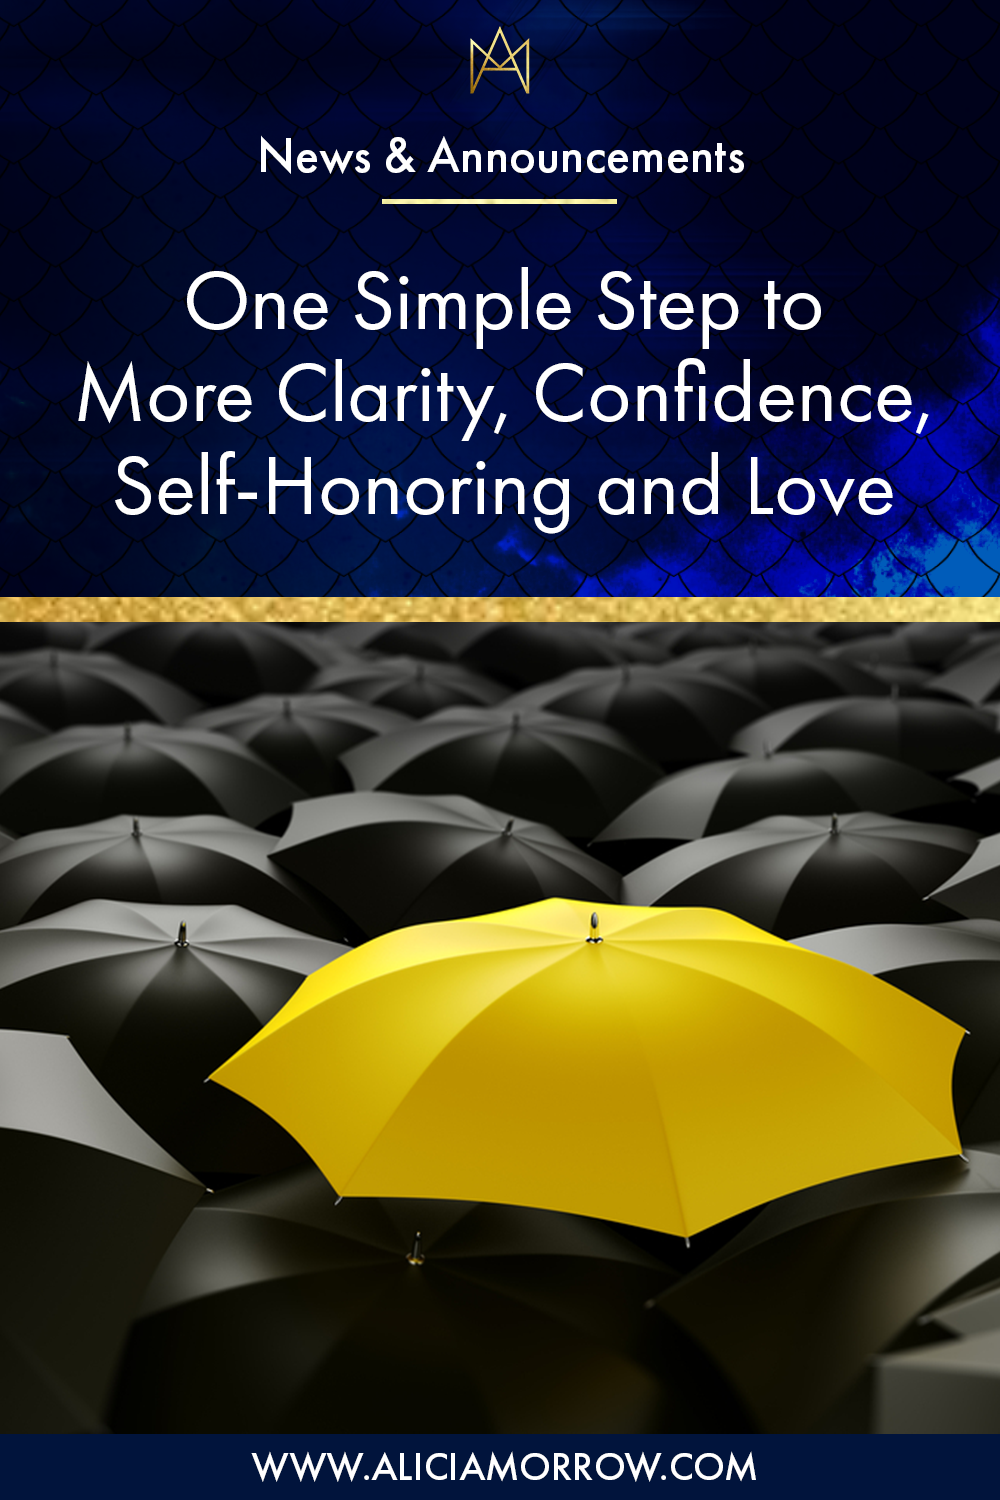 One Simple Step to More Clarity, Confidence, Self-Honoring and Love